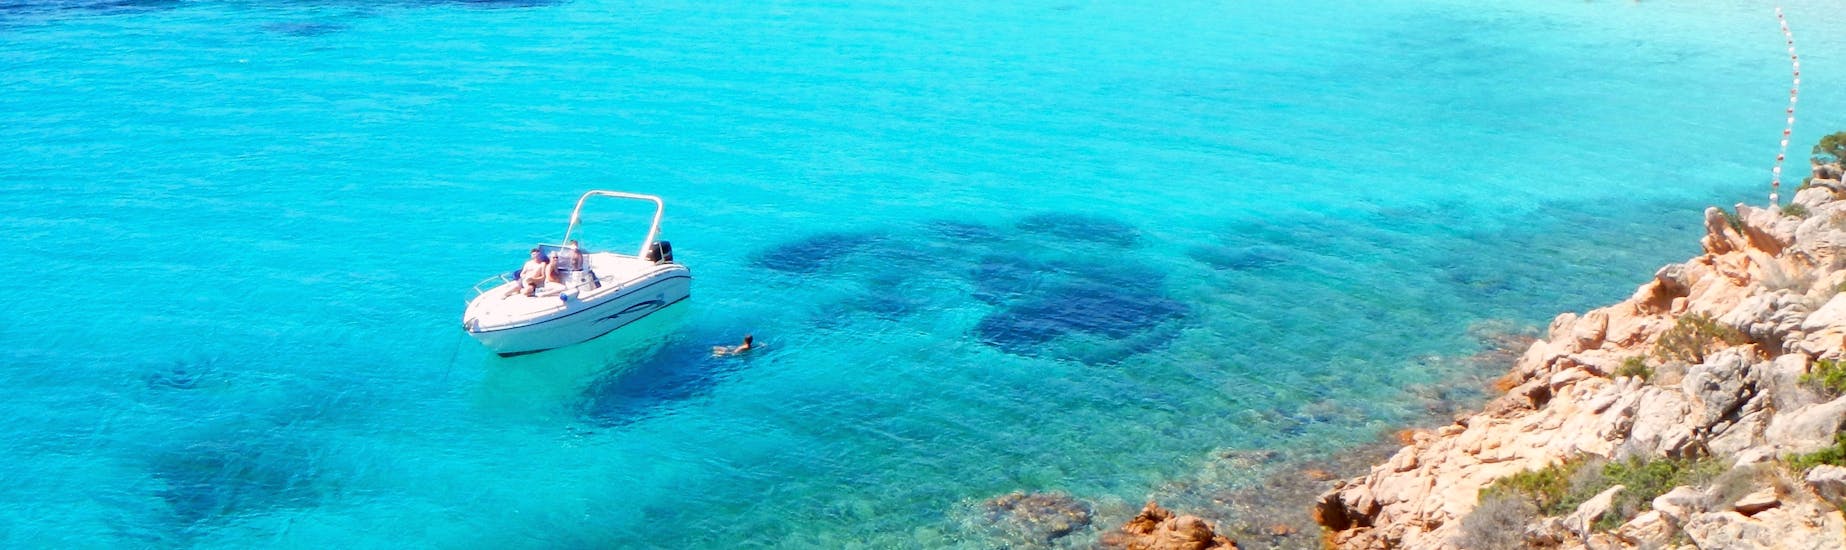 Our boat in the crystal clear water of a bay during the Private Boat Trip to the Tavolara Marine Park with Aperitif with Ecosport Sardinia.